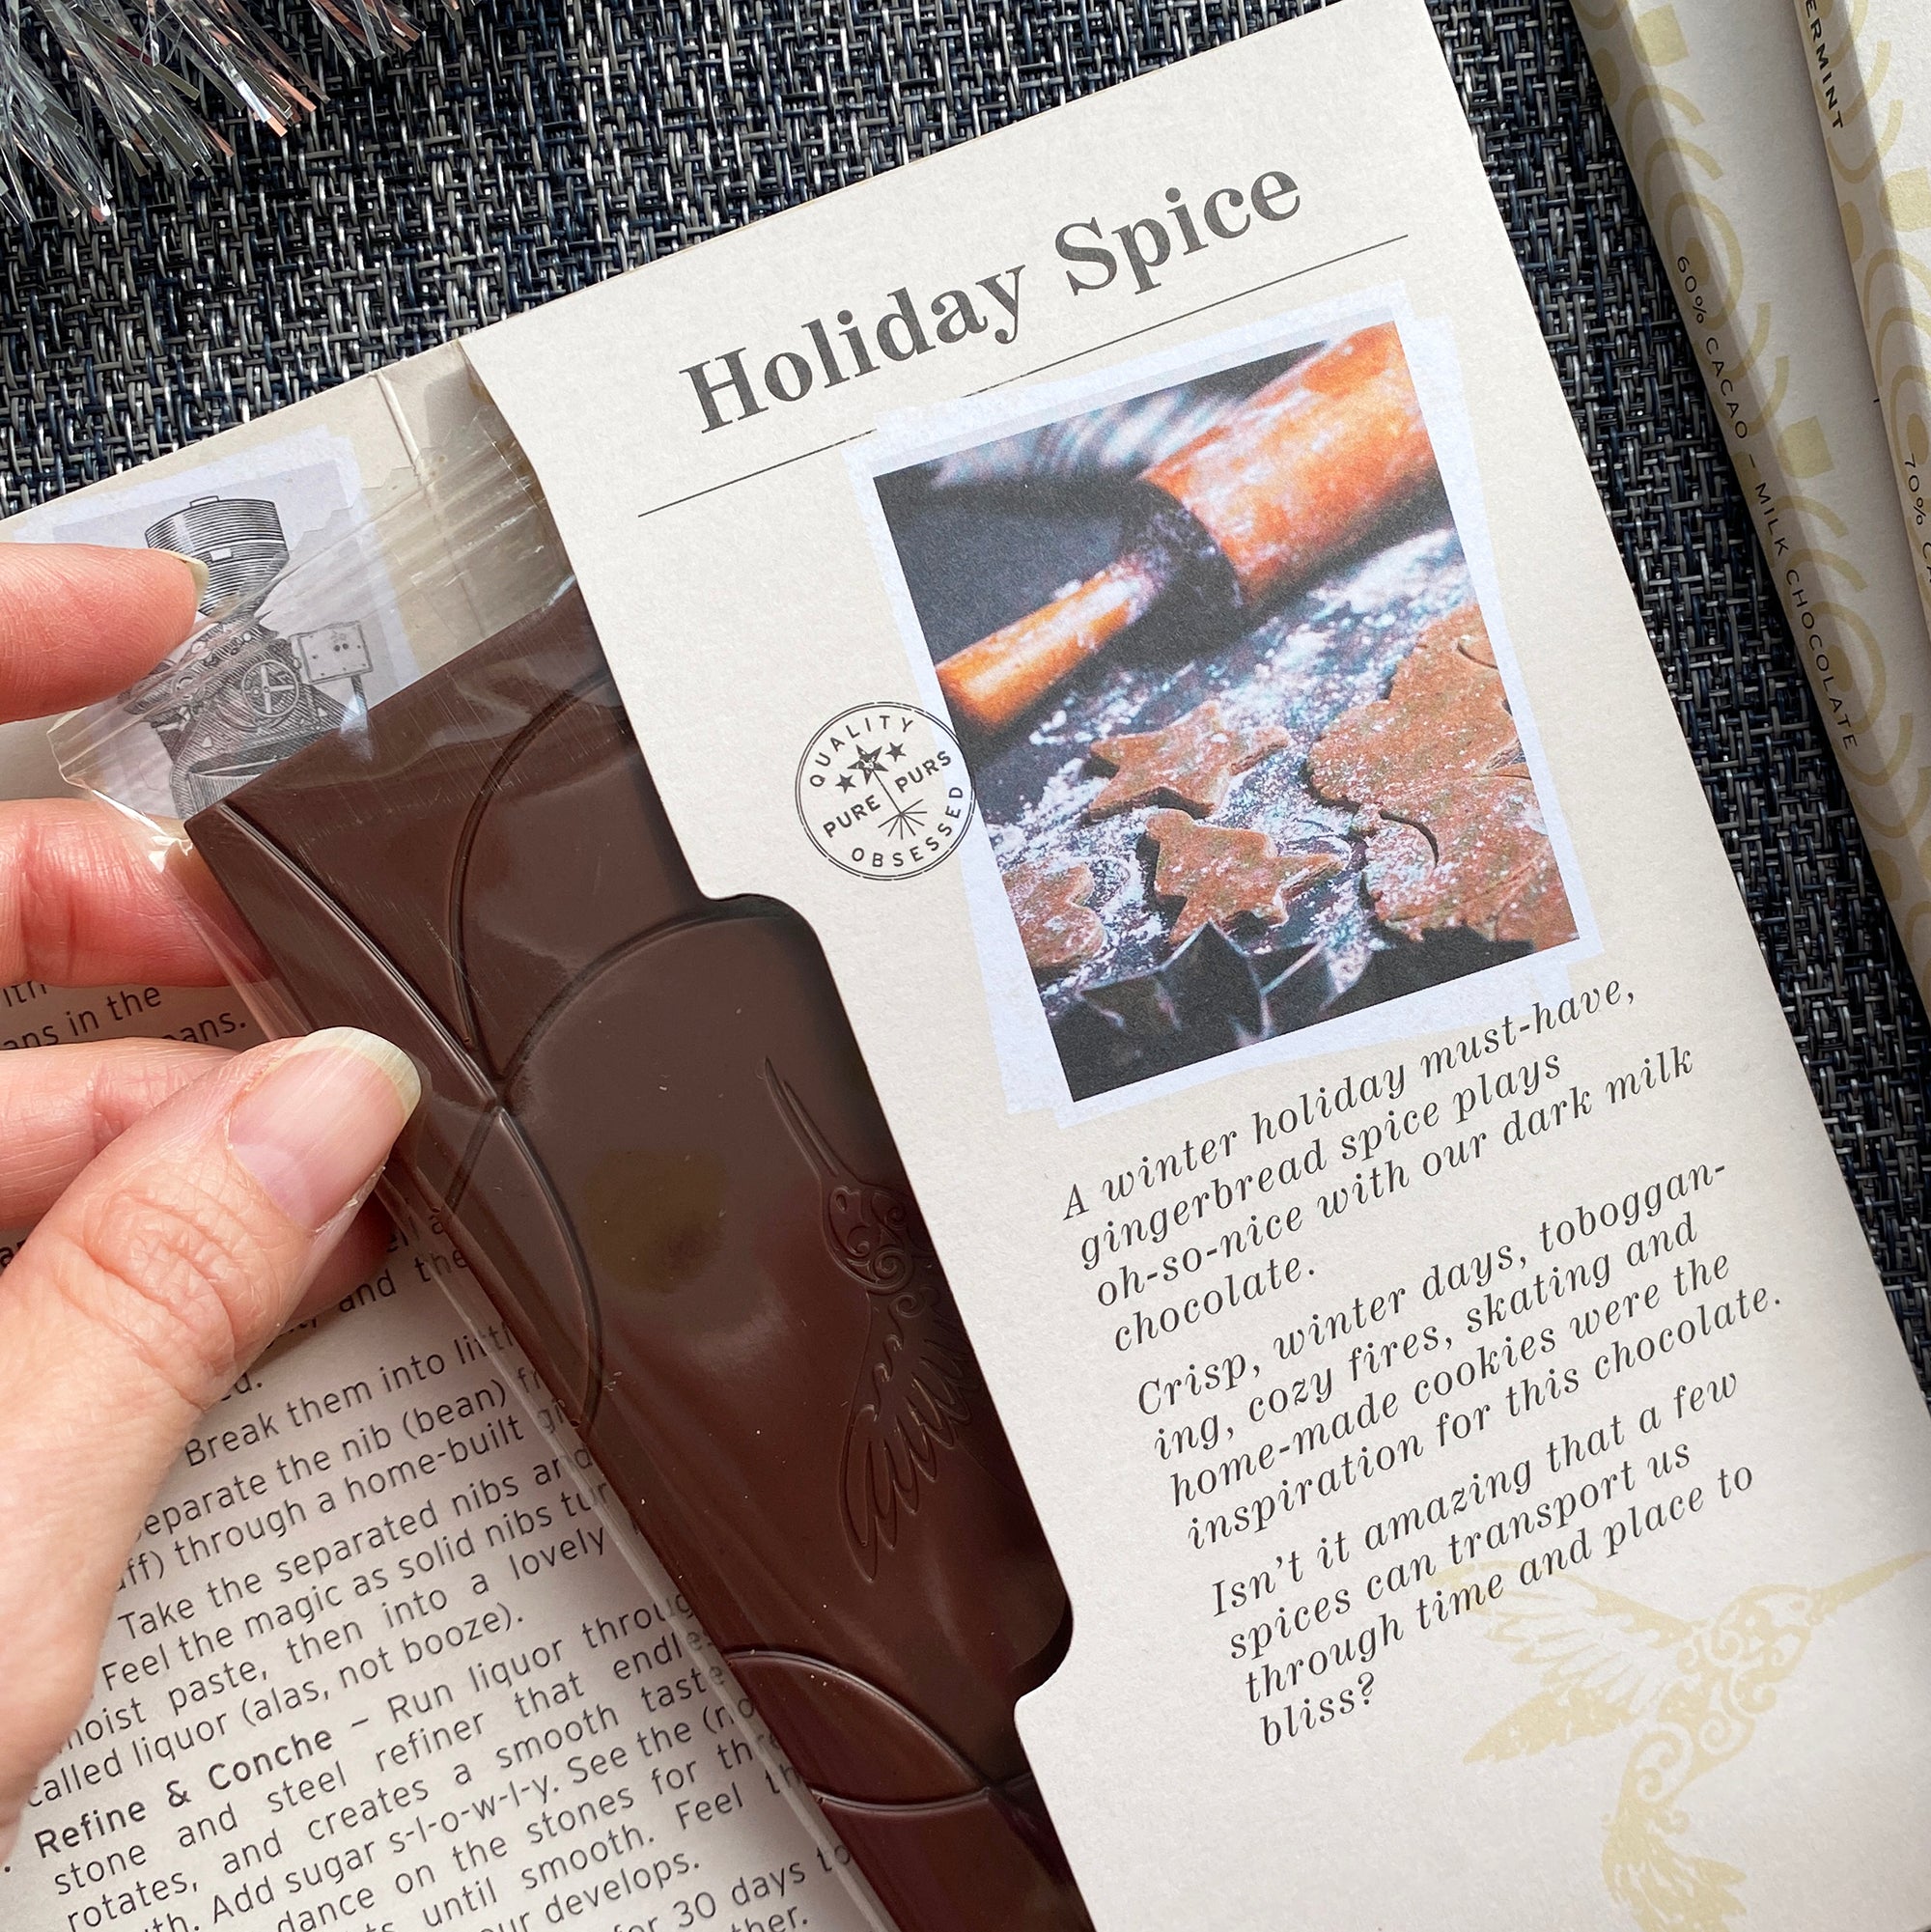 Opened Gingerbread Spice chocolate bar, revealing inside story for this winter flavour classic